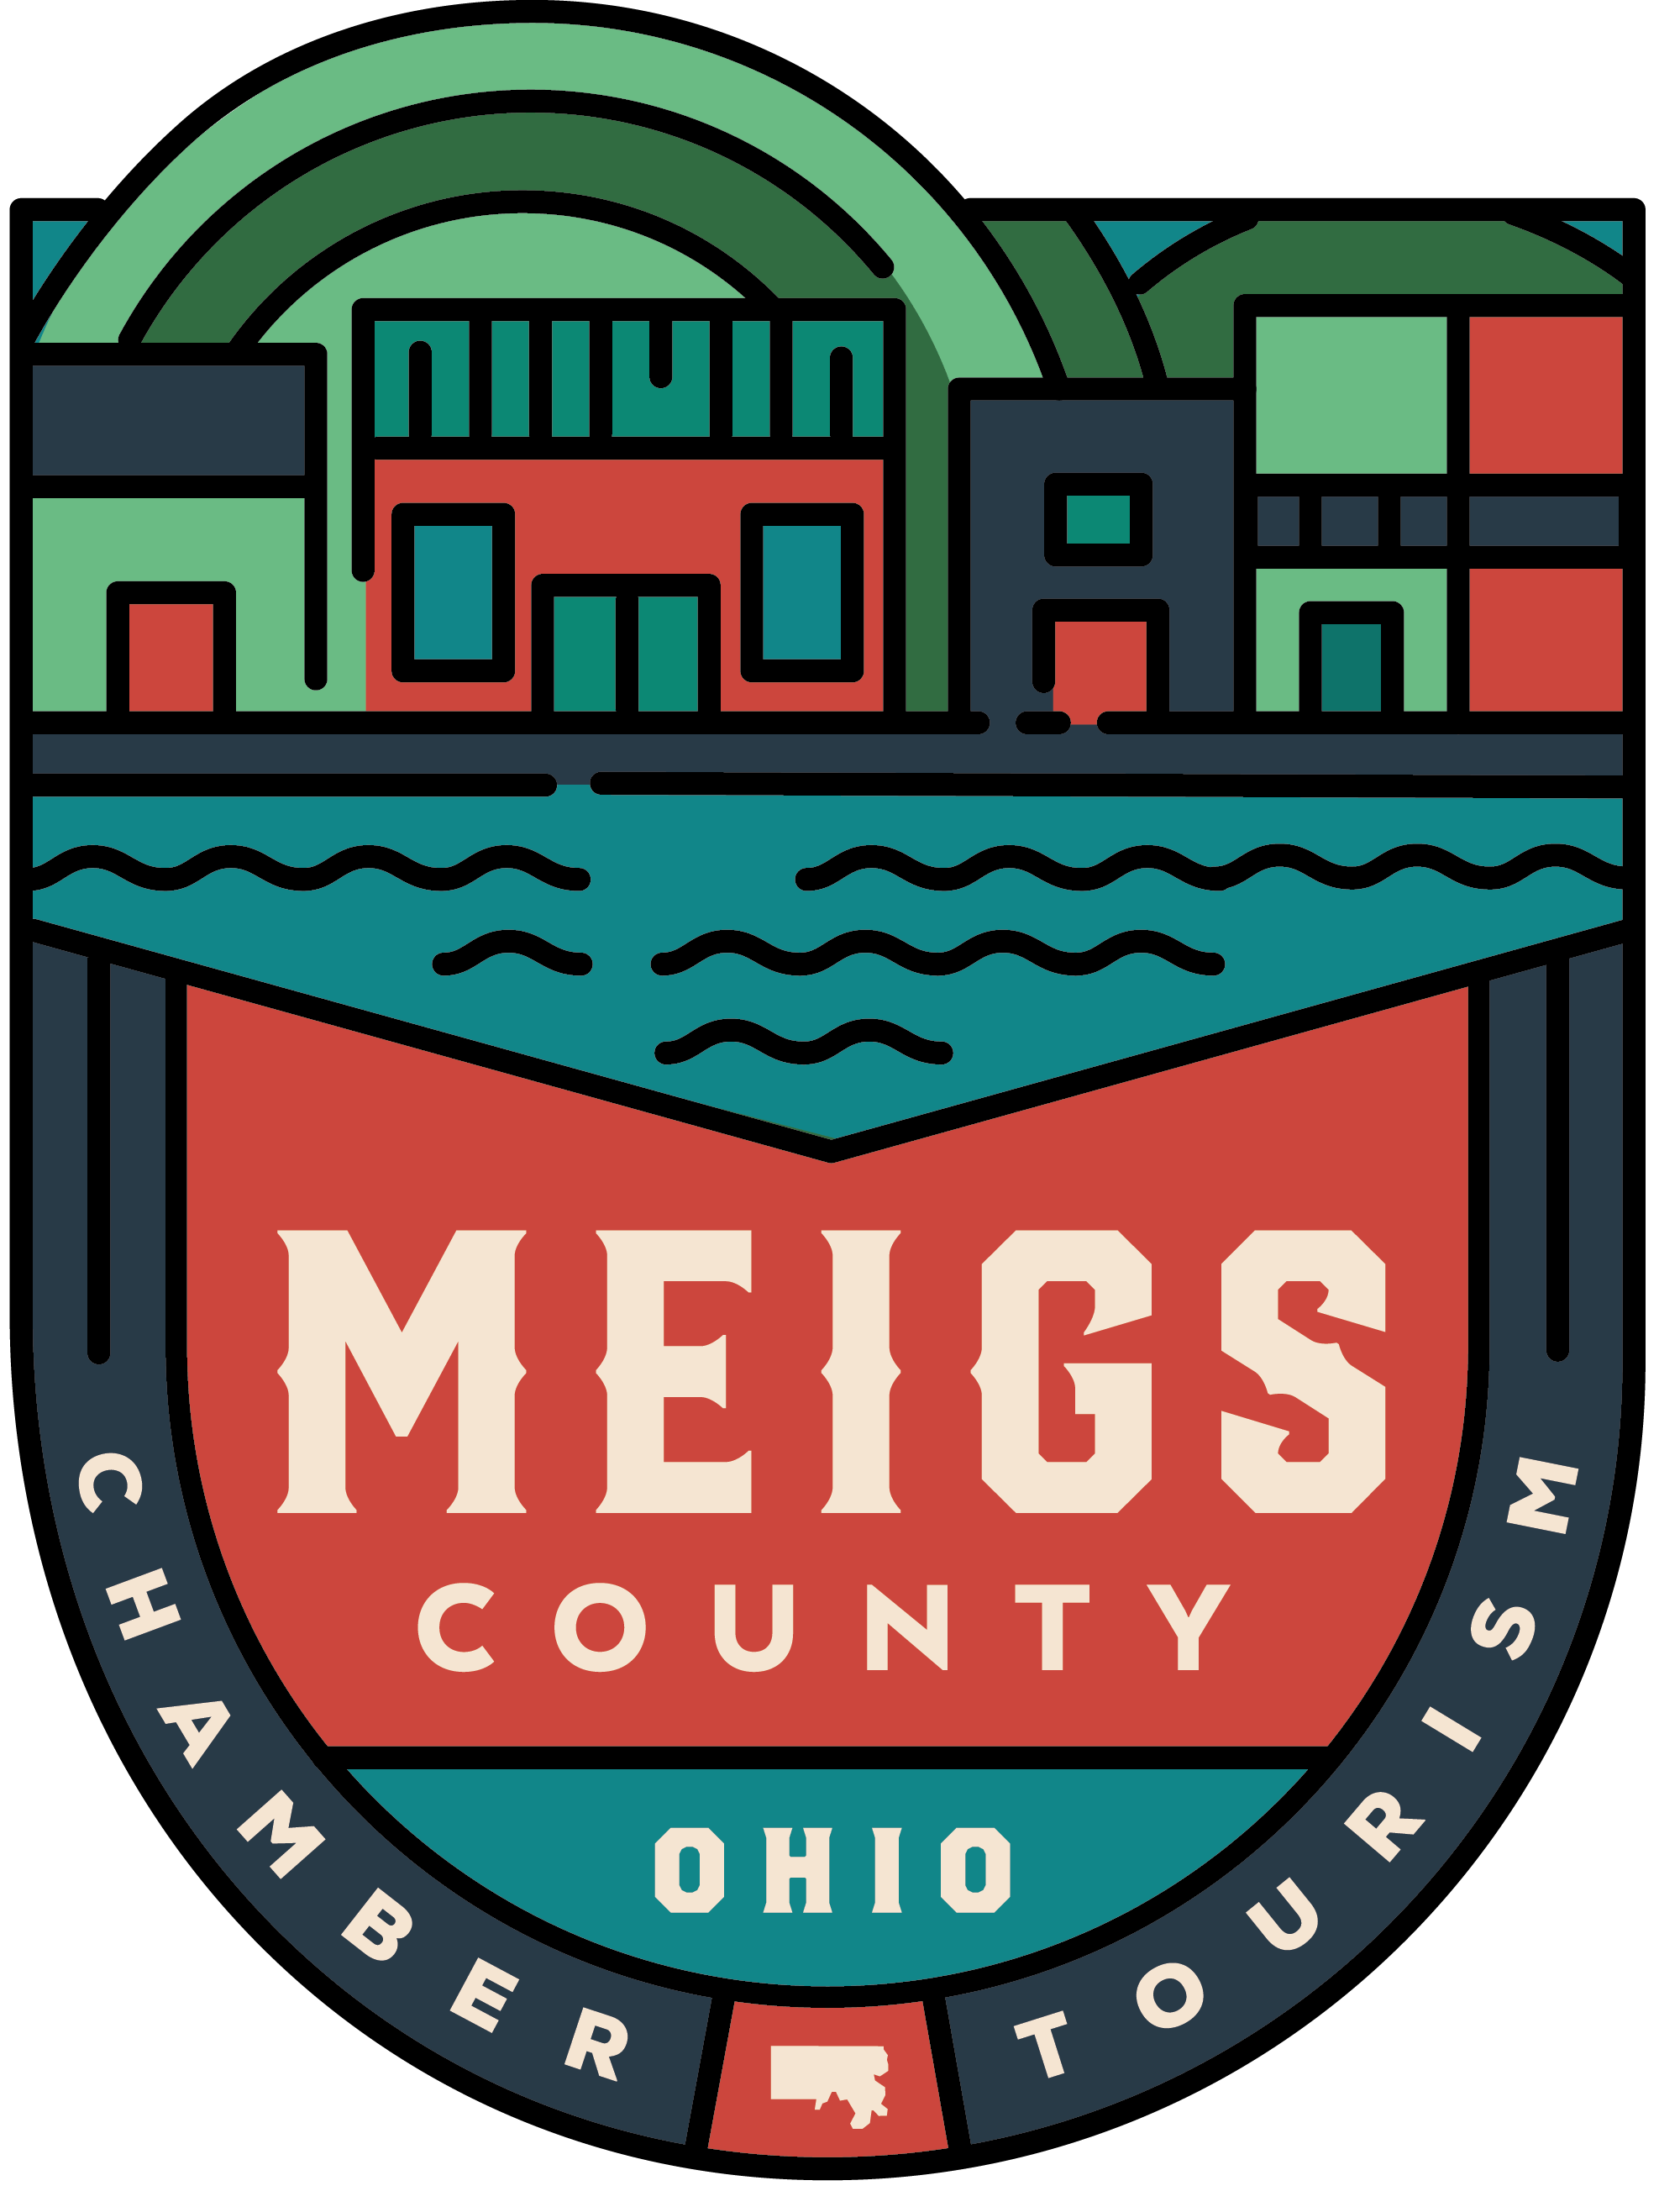 Meigs County Chamber of Commerce & Tourism logo